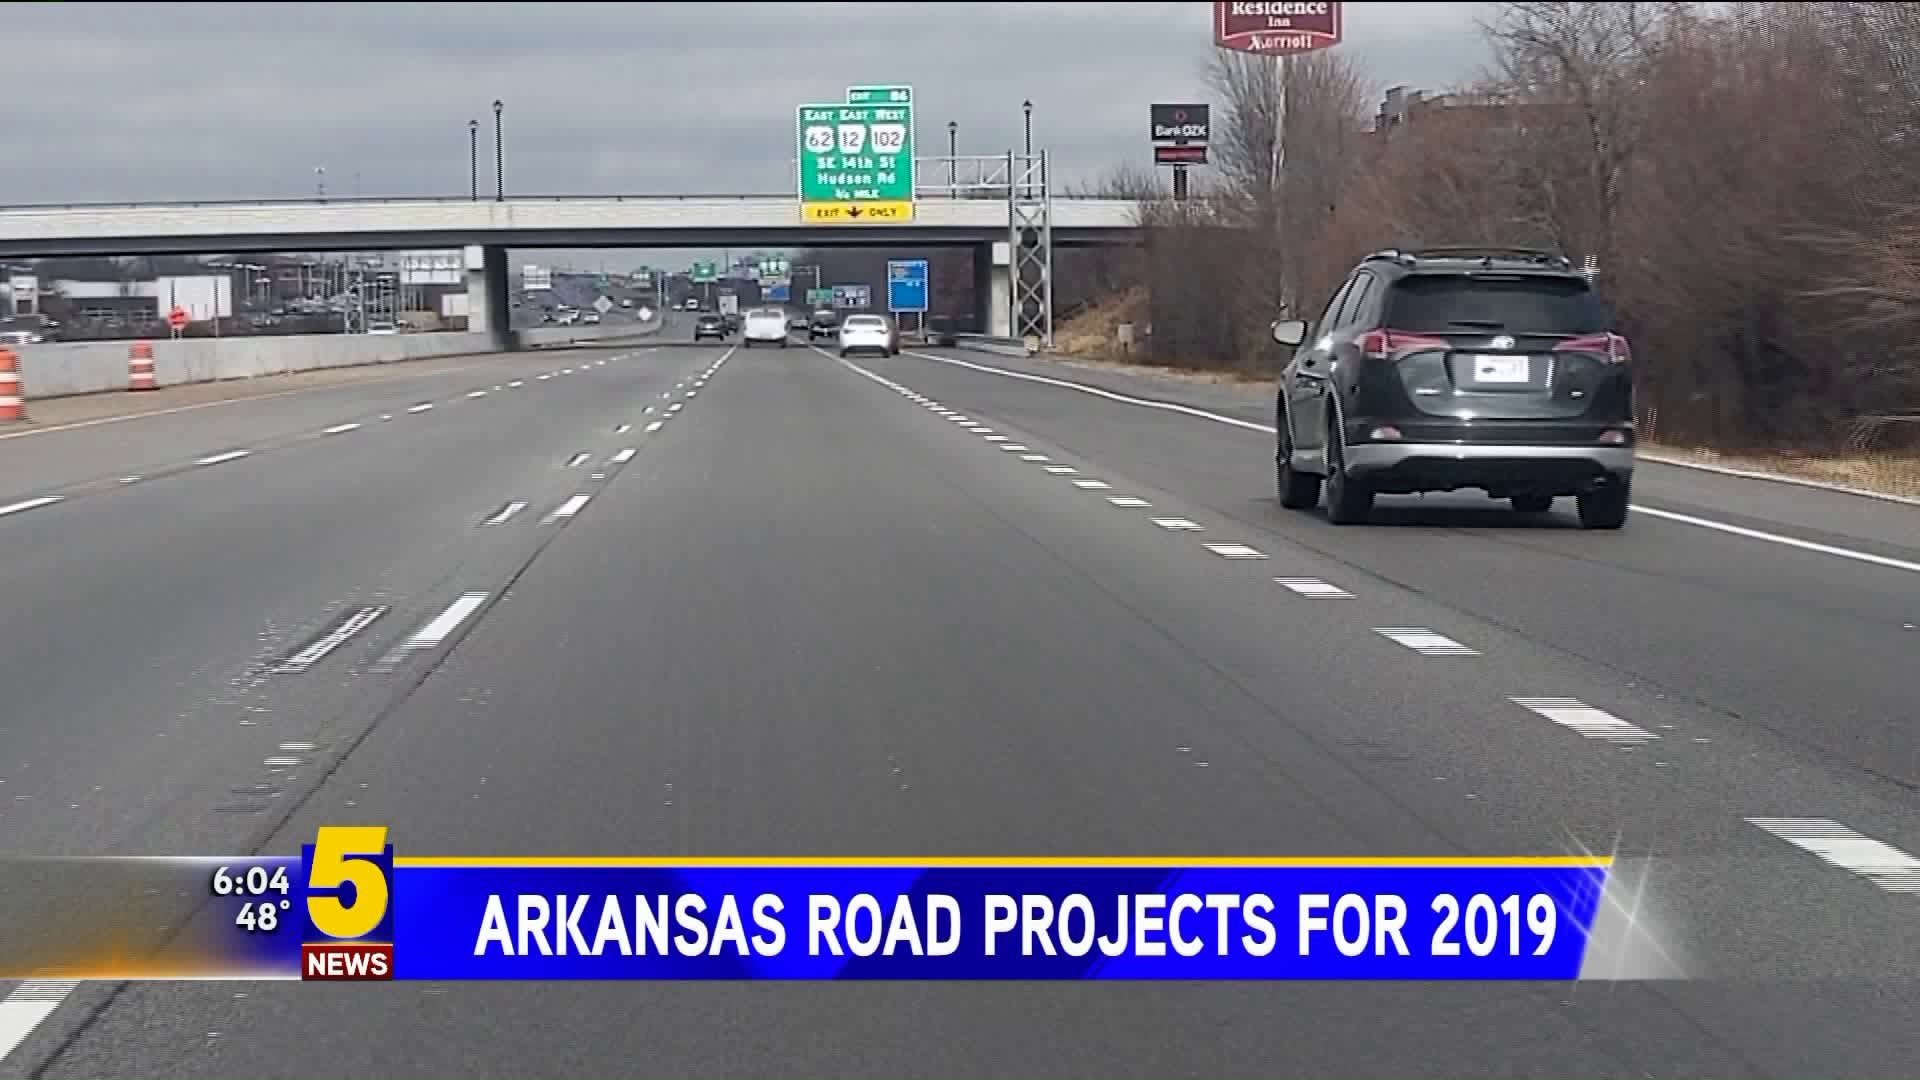 Arkansas Road Projects for 2019